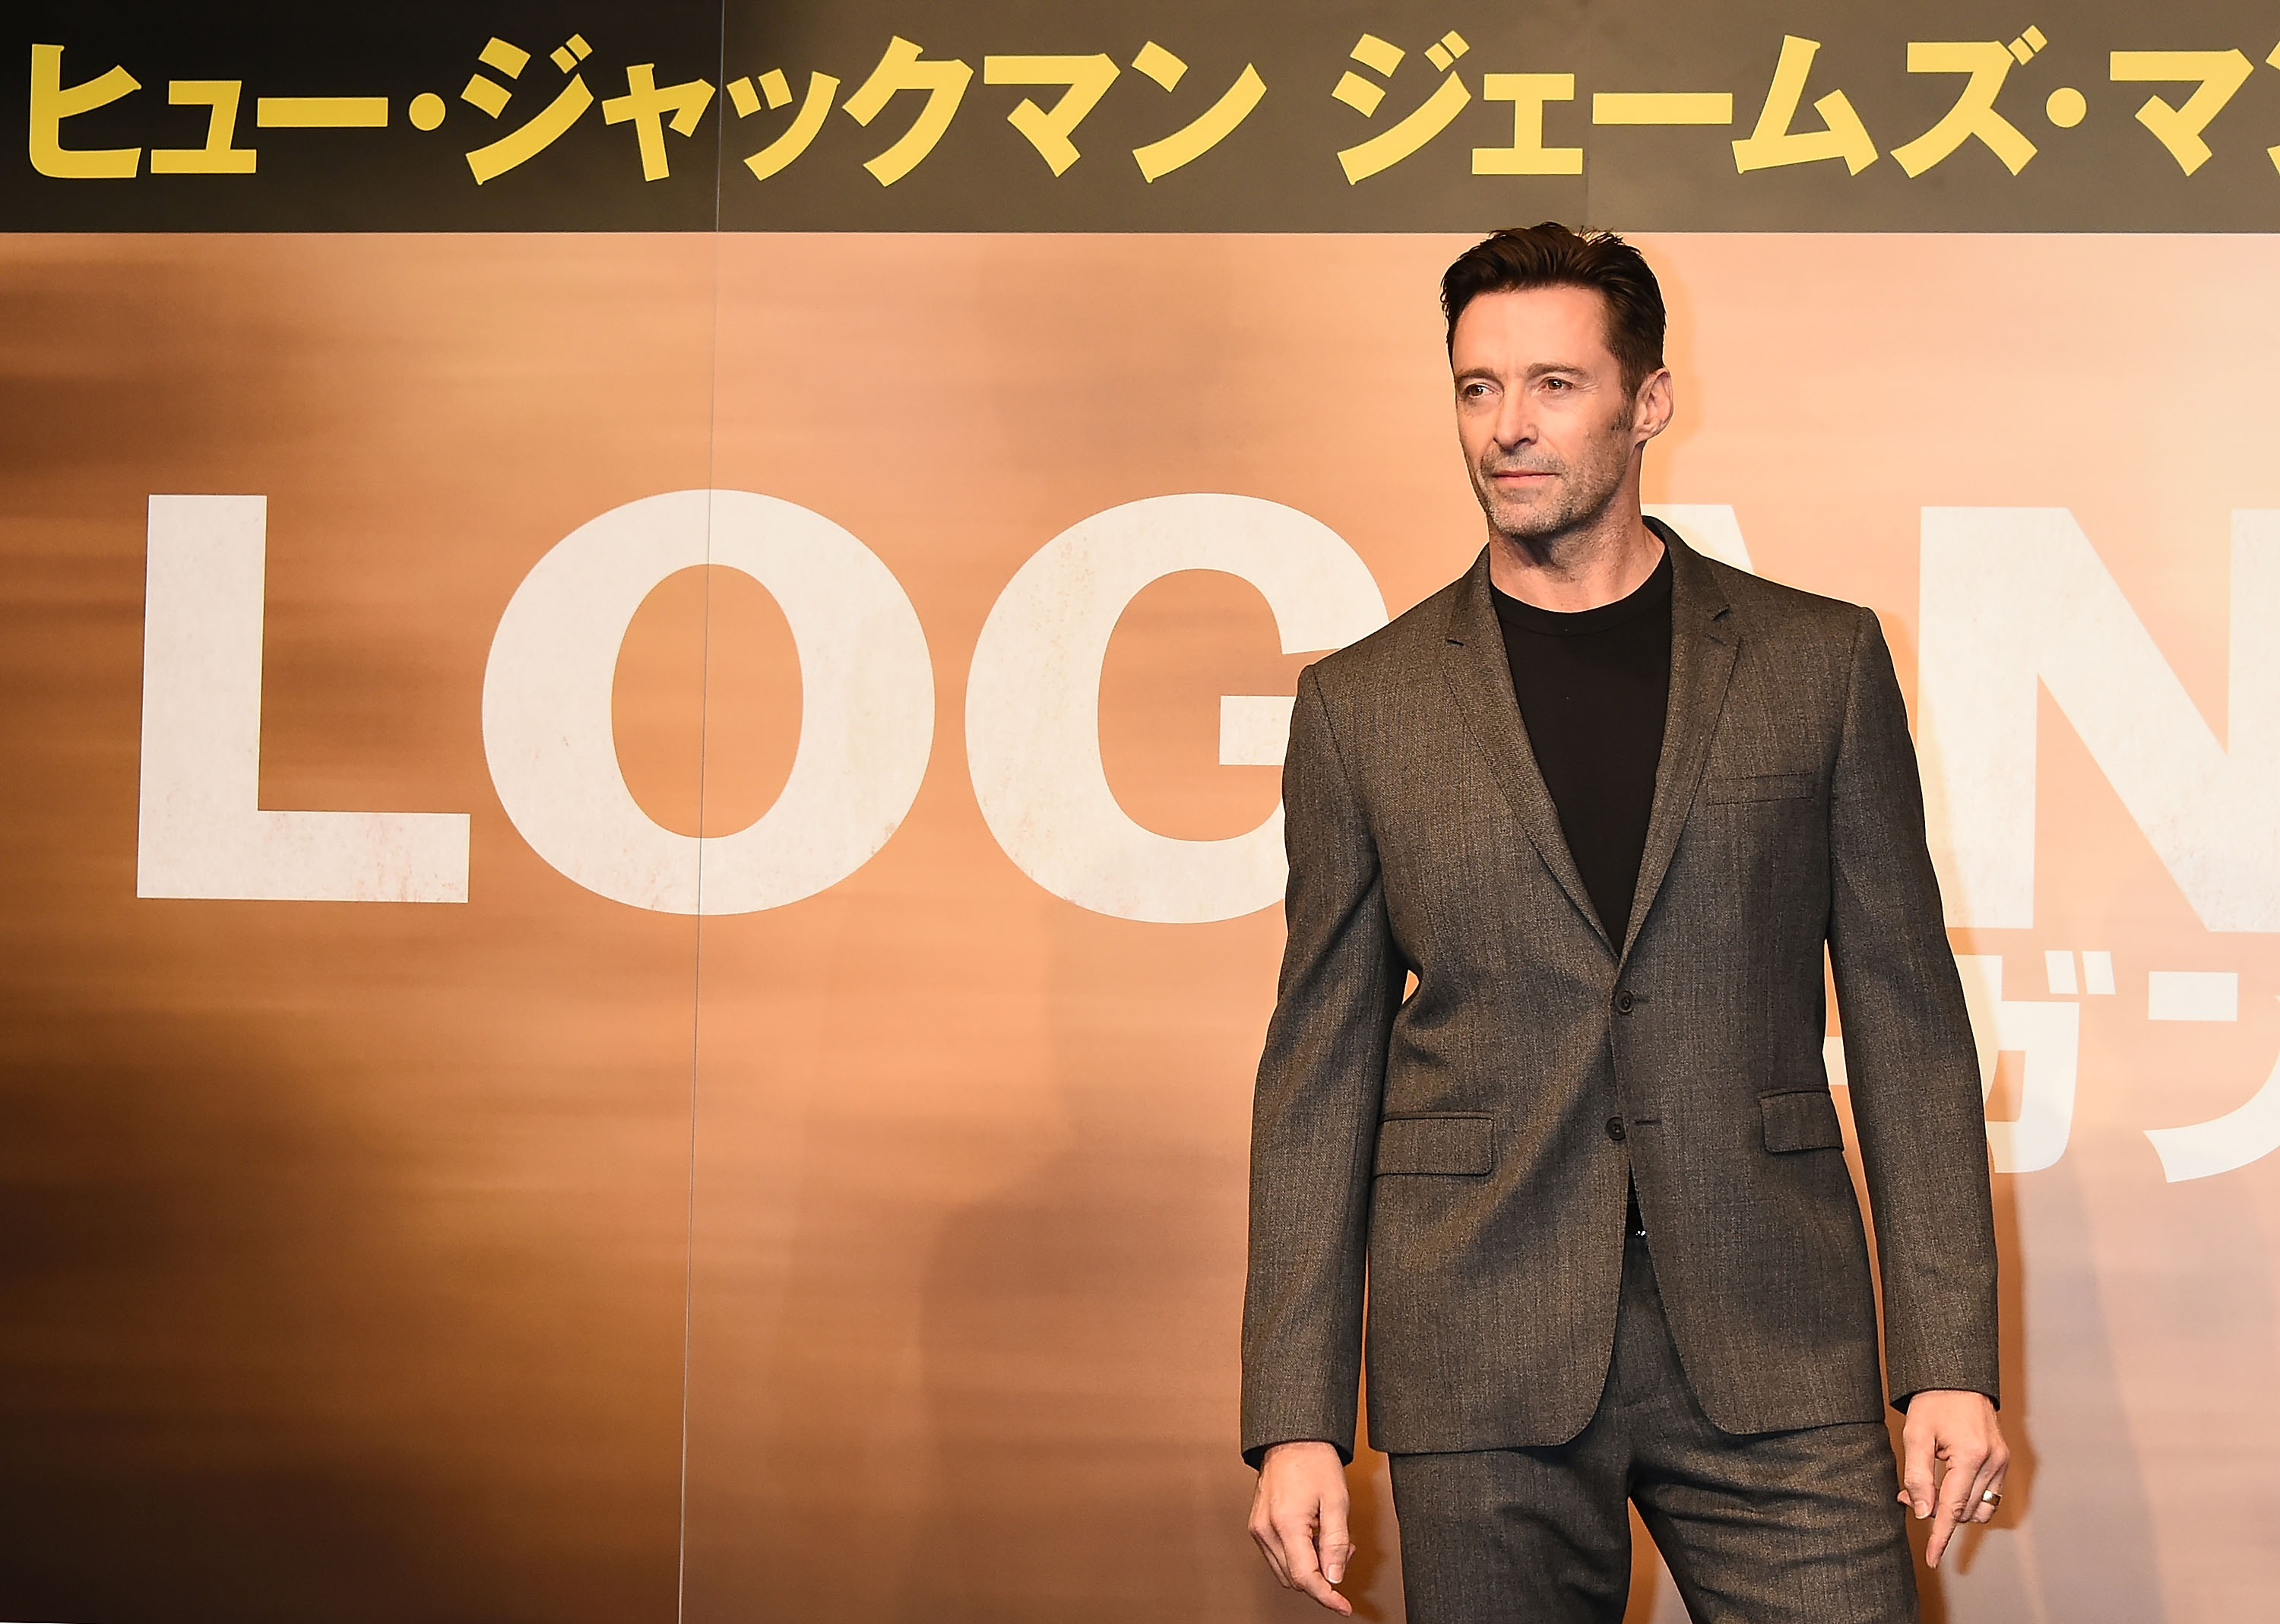 Hugh Jackman at the "Logan" press tour in Tokyo, Japan on May 25, 2017 | Source: Getty Images